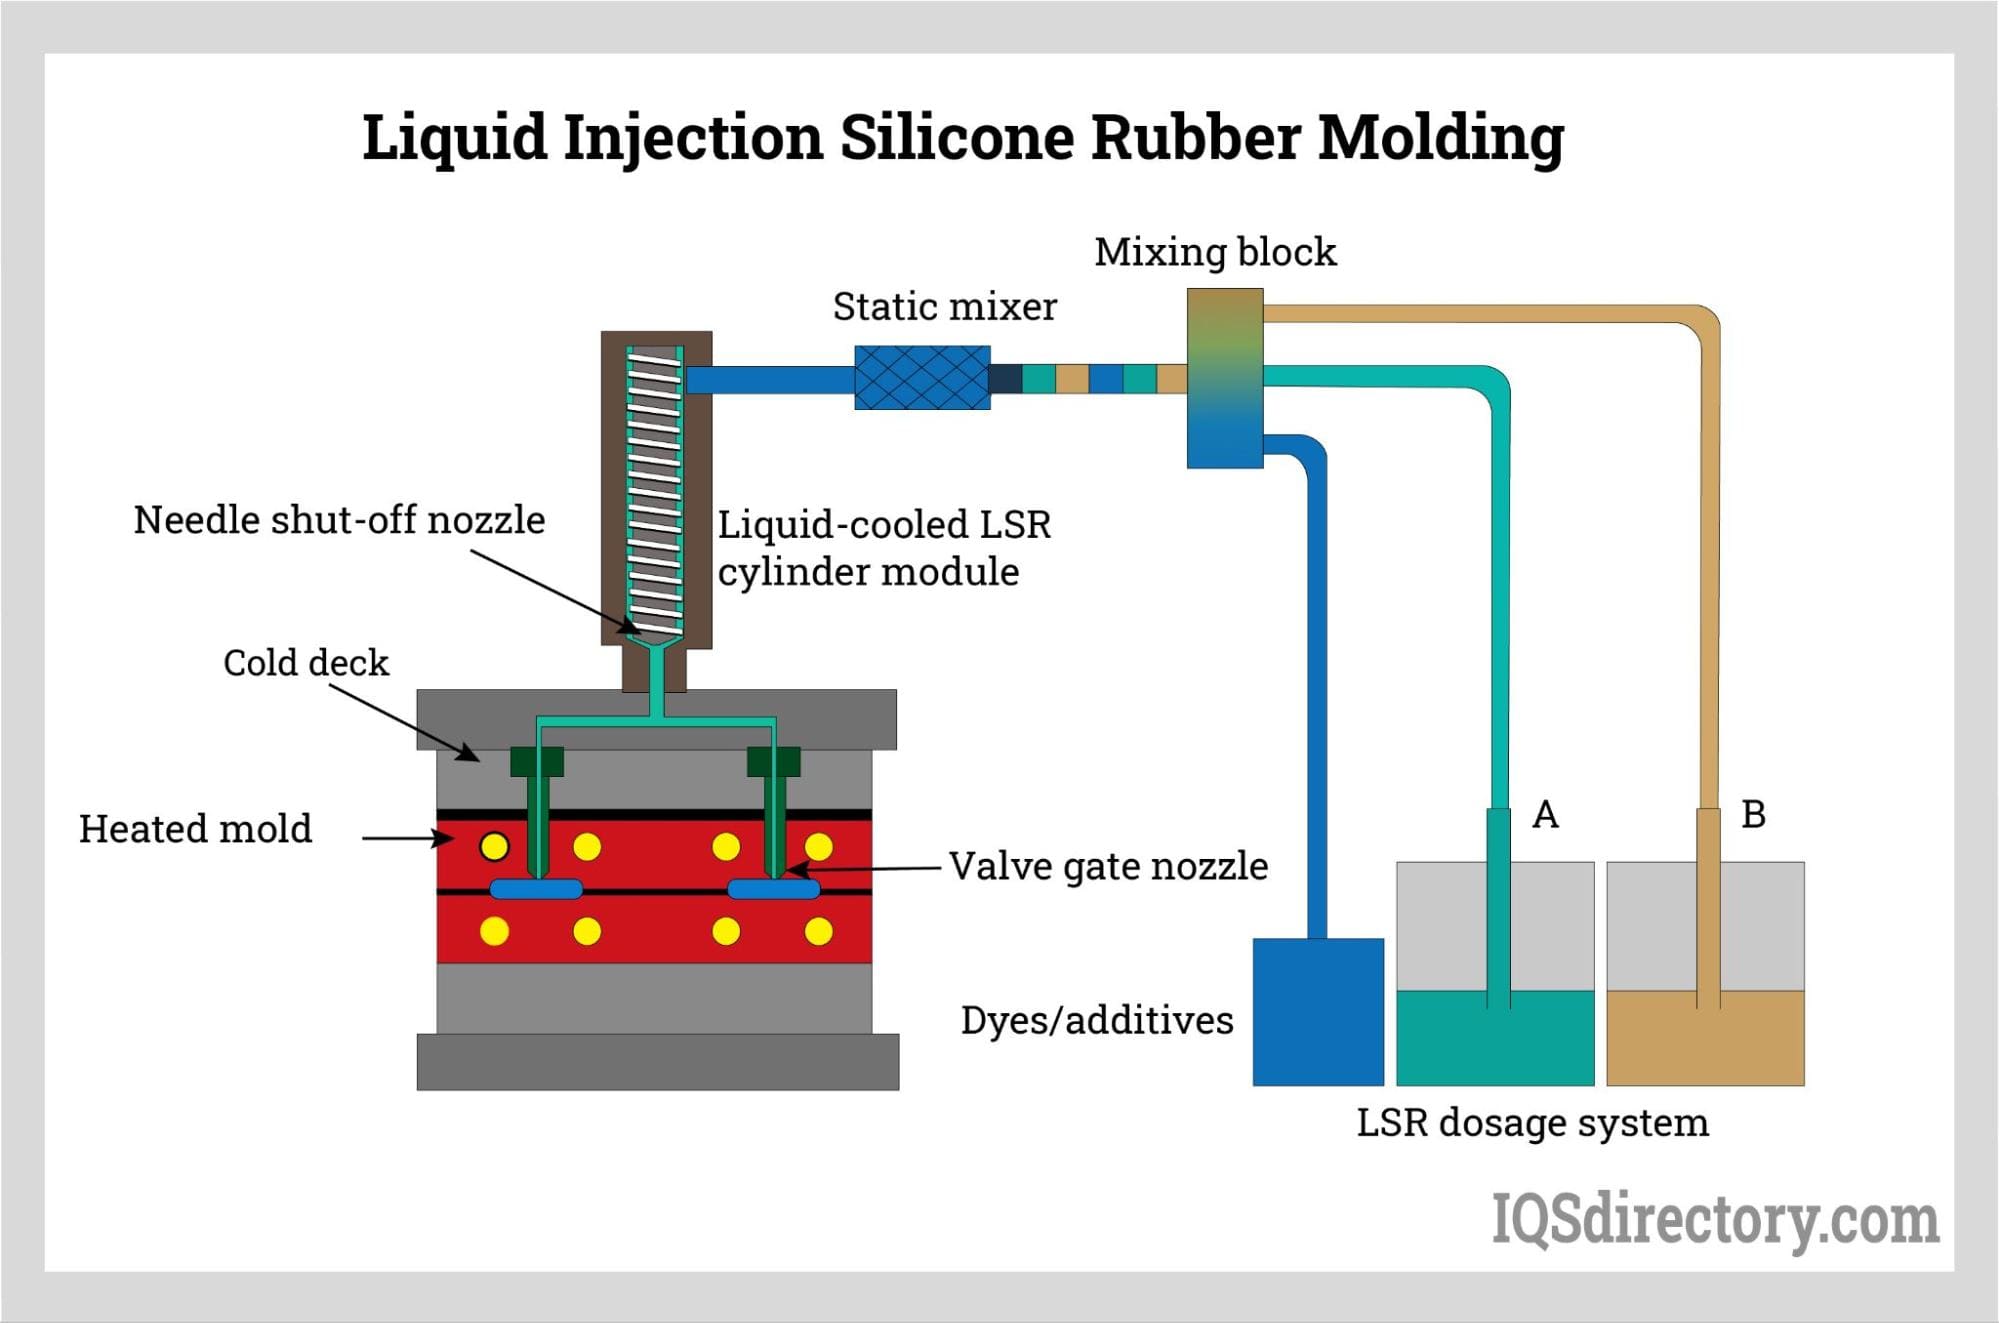 Liquid Injection Silicone Rubber Molding